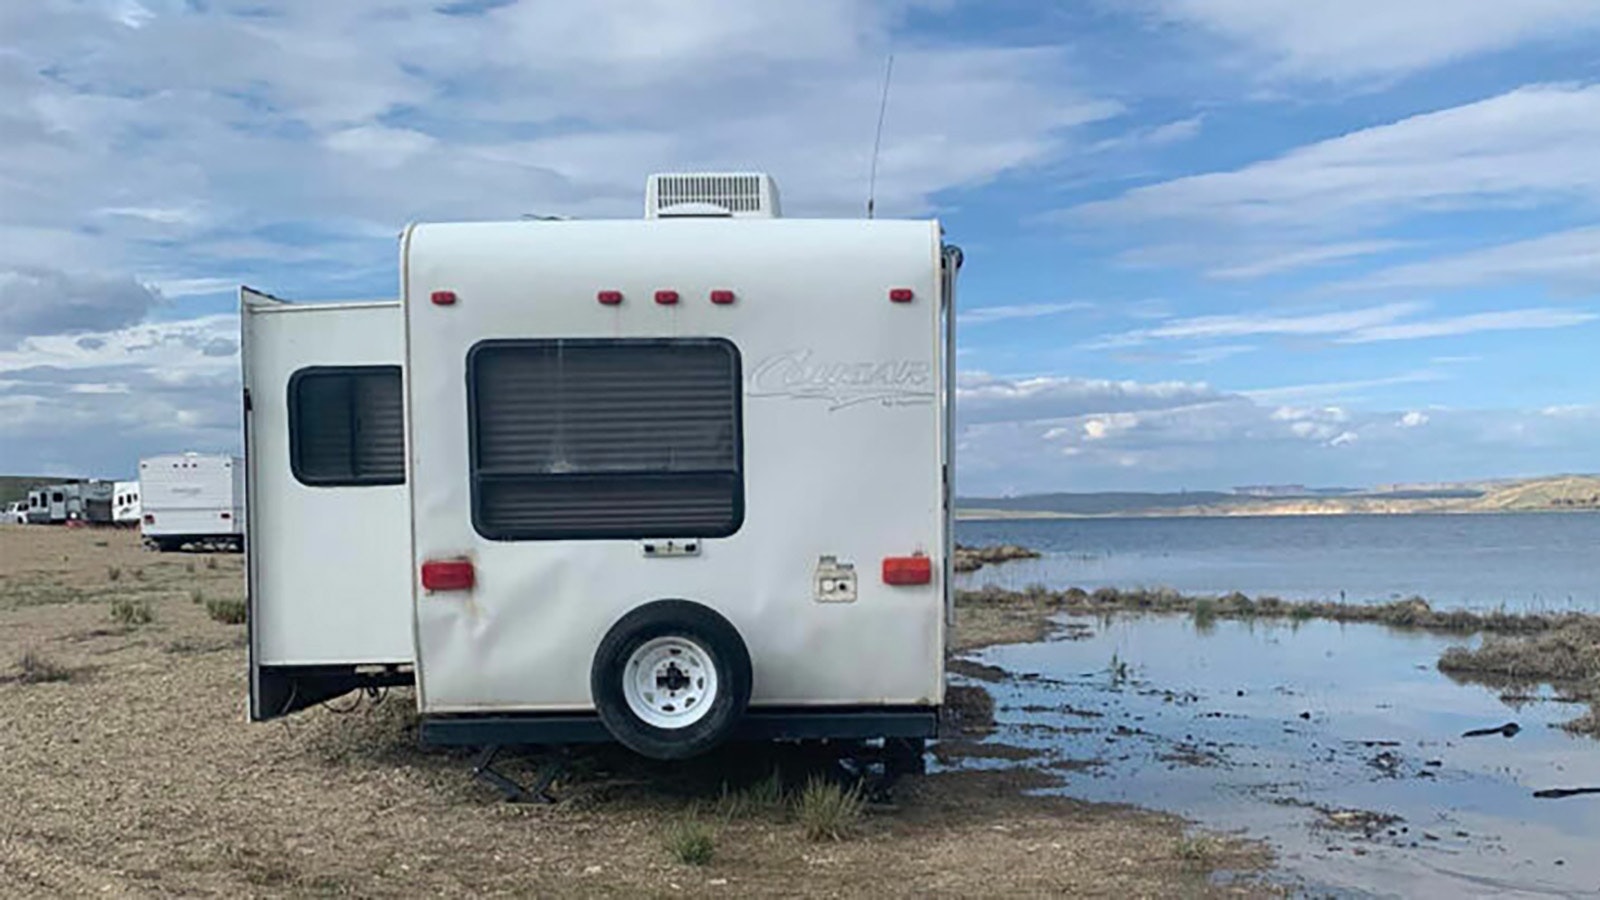 The water level rises close to a line of campers parked along the beach at Flaming Gorge Reservoir.